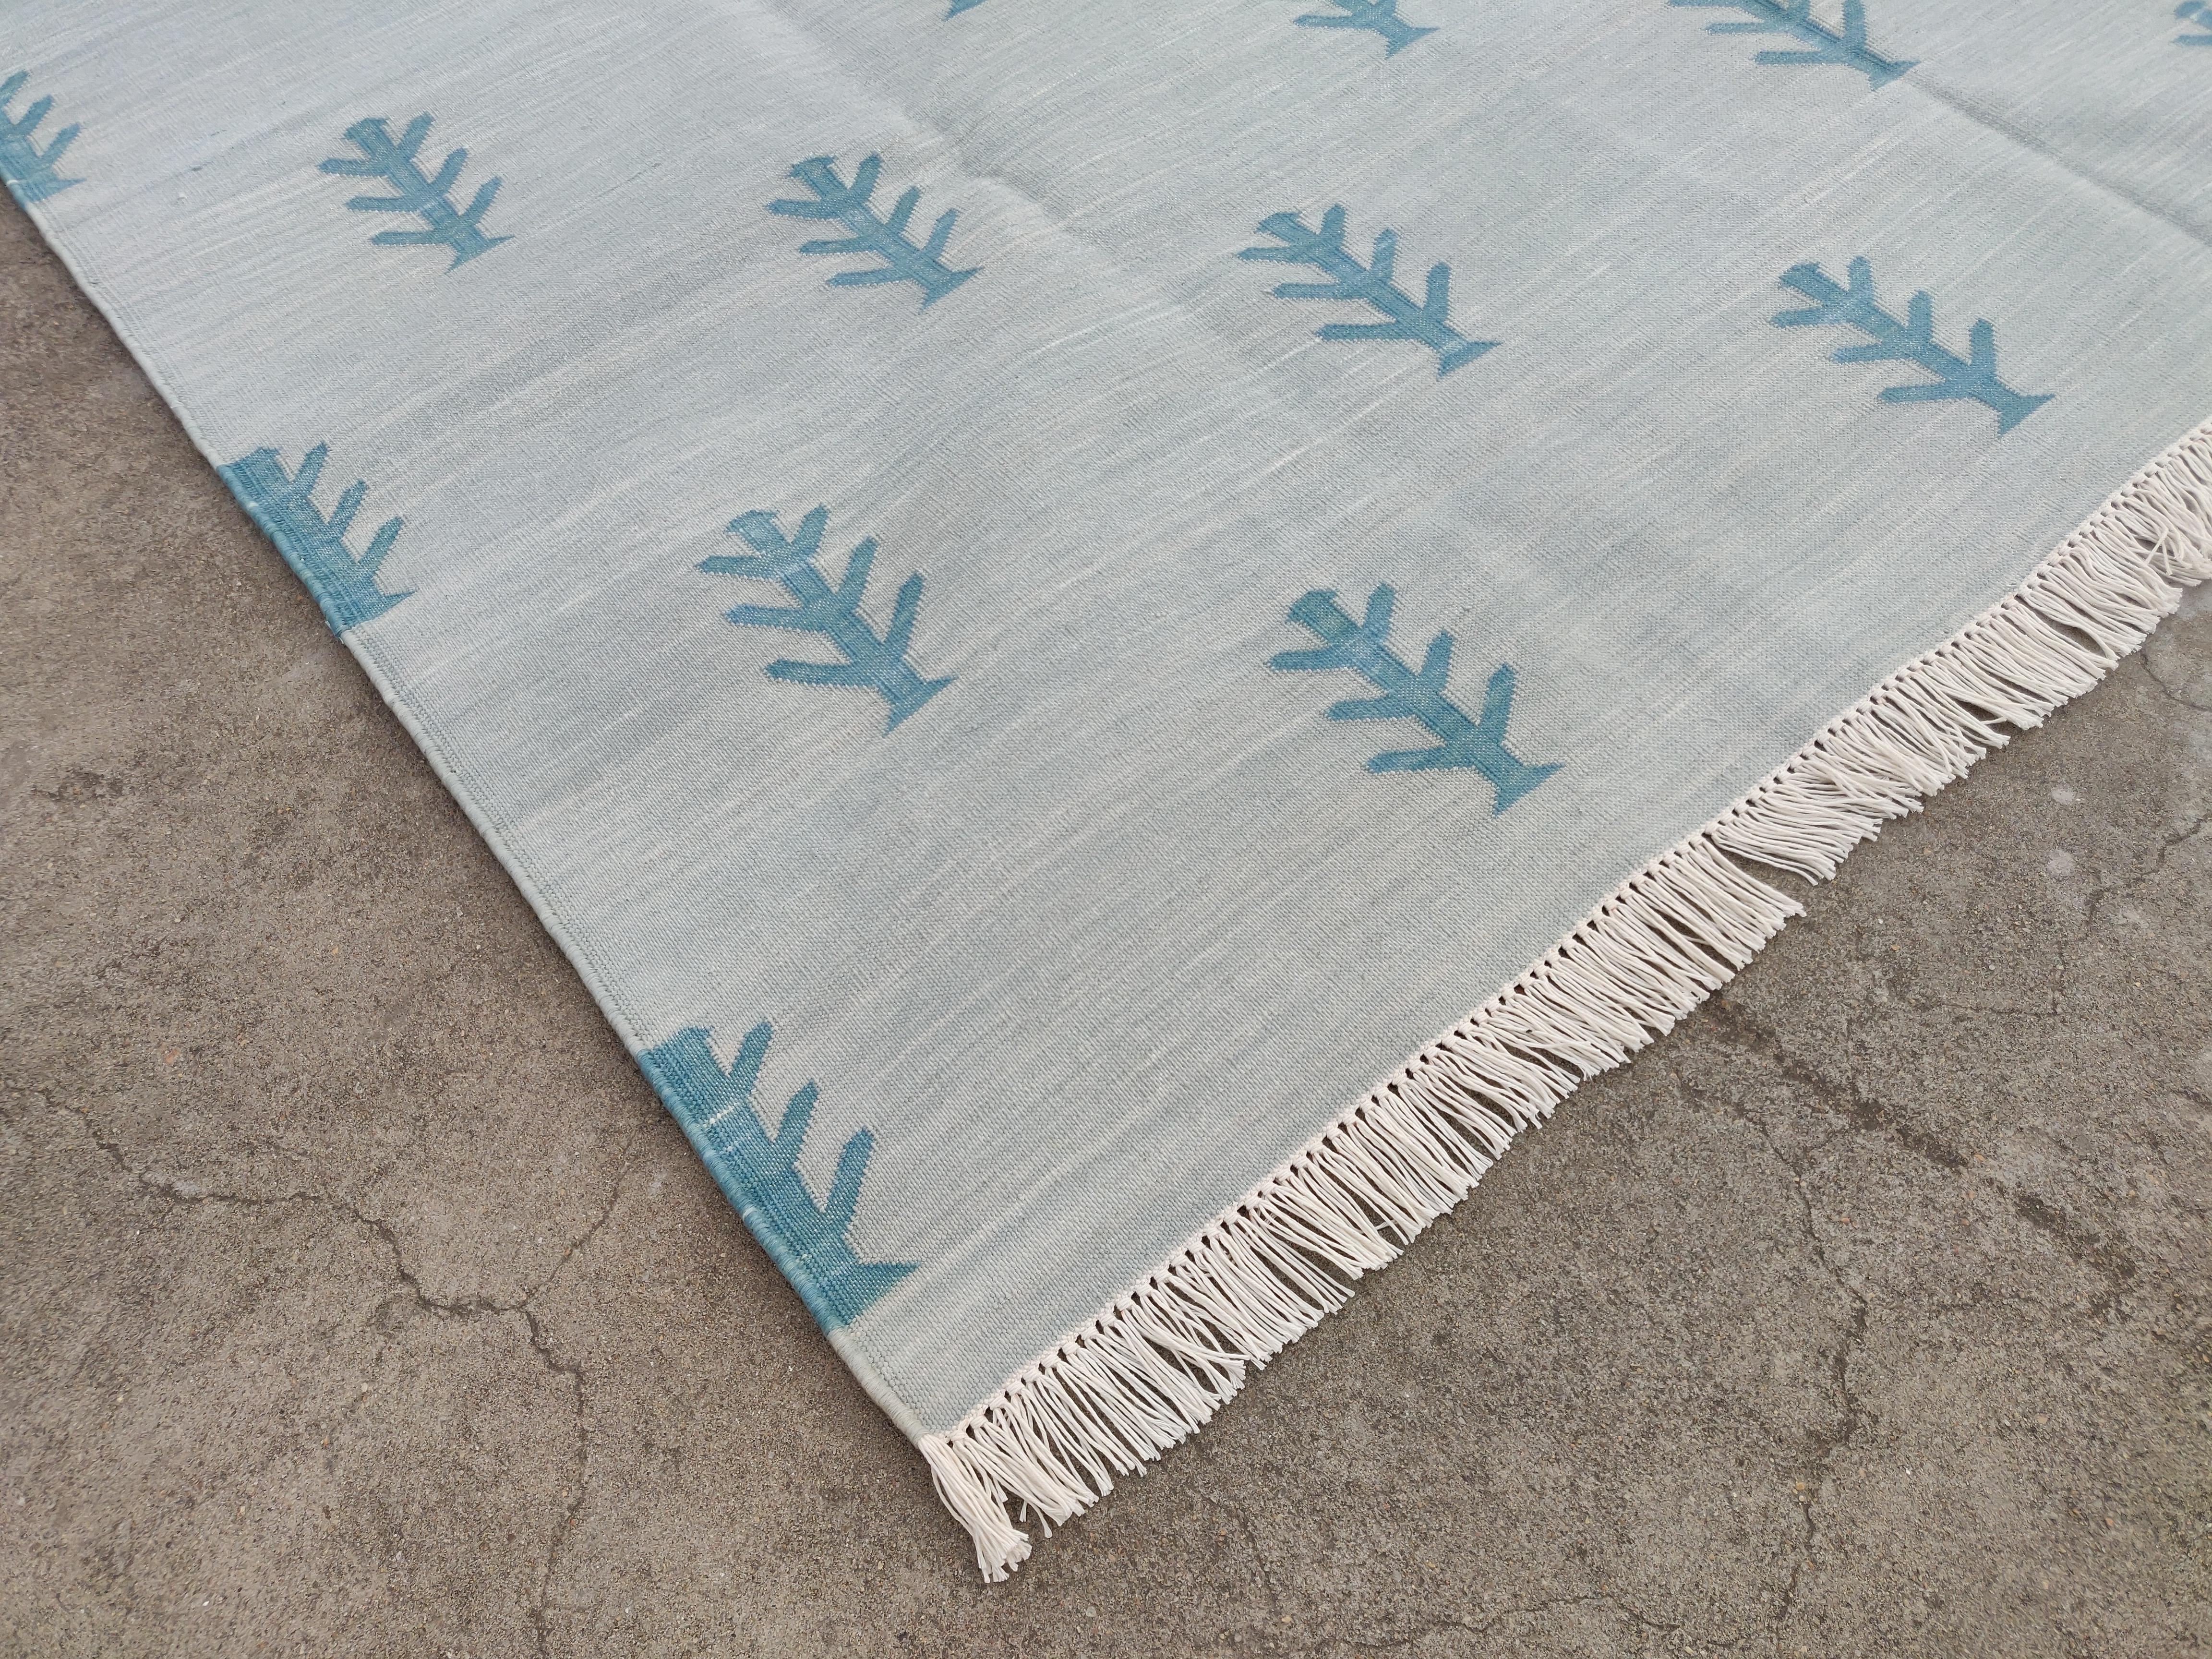 Hand-Woven Handmade Cotton Area Flat Weave Rug, 5x7 Grey, Blue Tree Pattern Indian Dhurrie For Sale